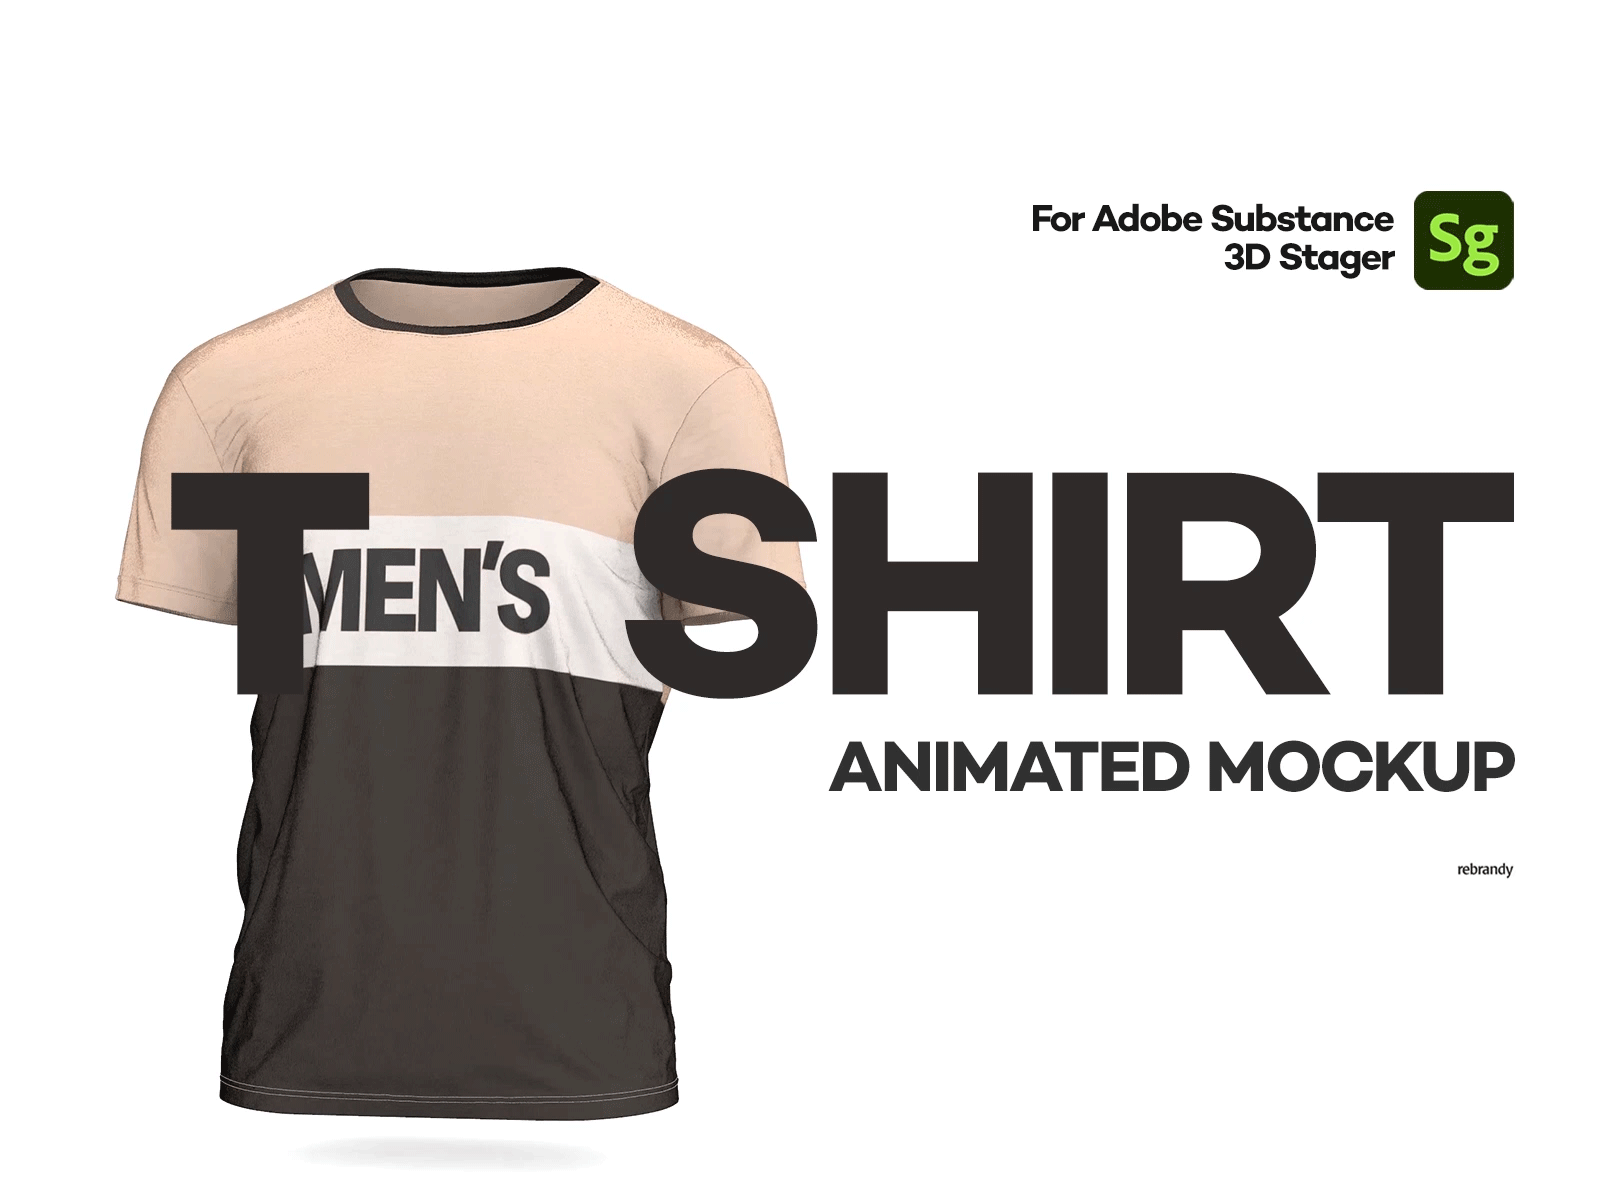 Men's T-shirt Animated Mockup - 3D Stager 360